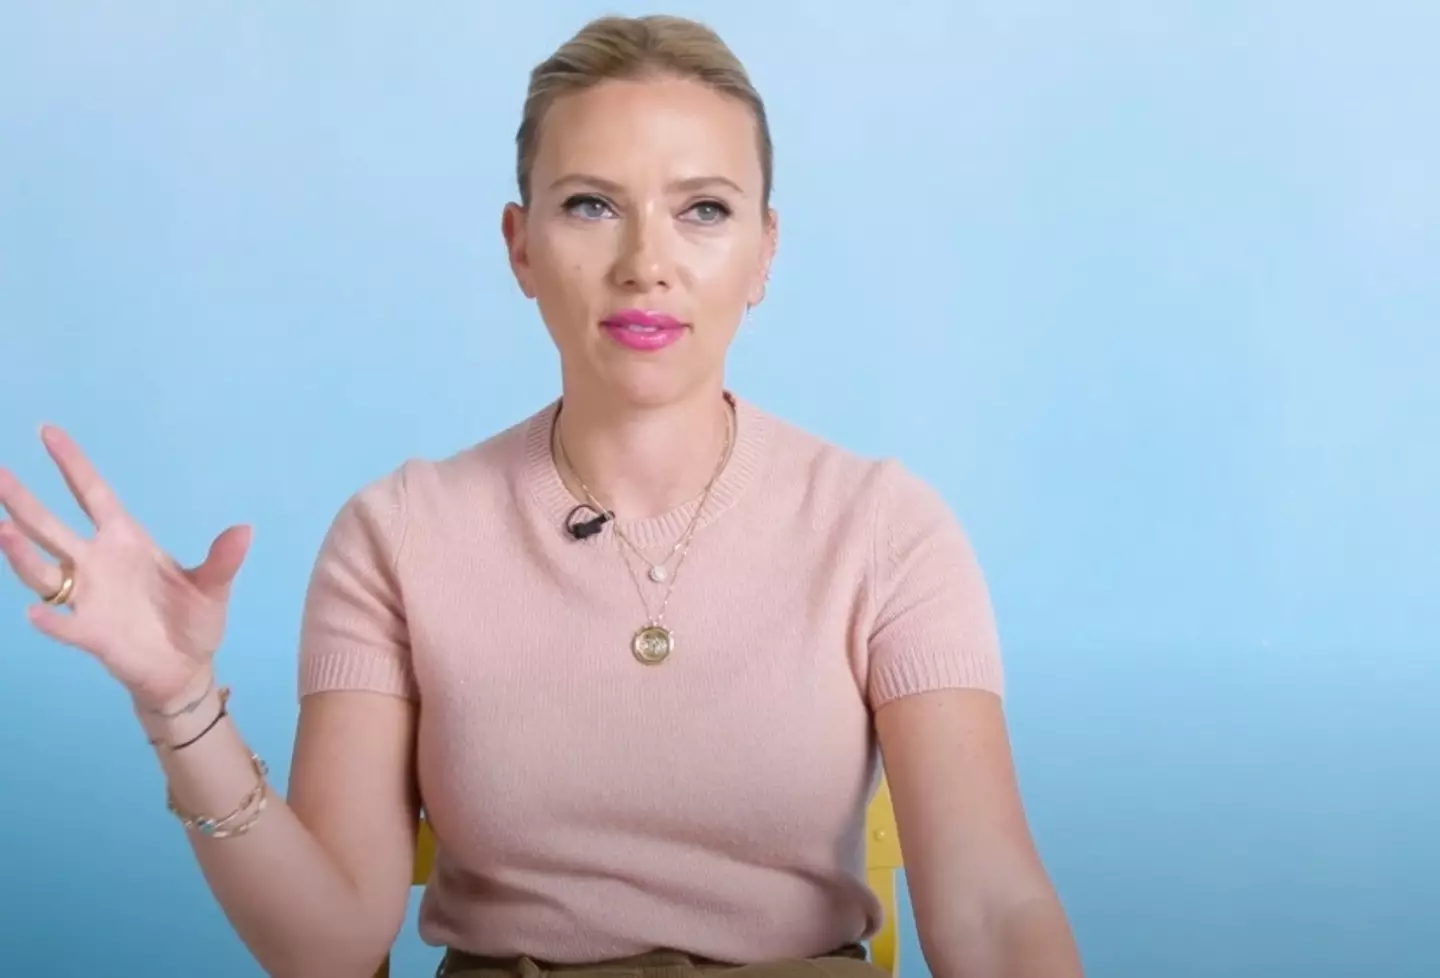 Scarlett Johansson reveals how getting turned down for two big movie roles left her feeling 'frustrated' and 'hopeless'.